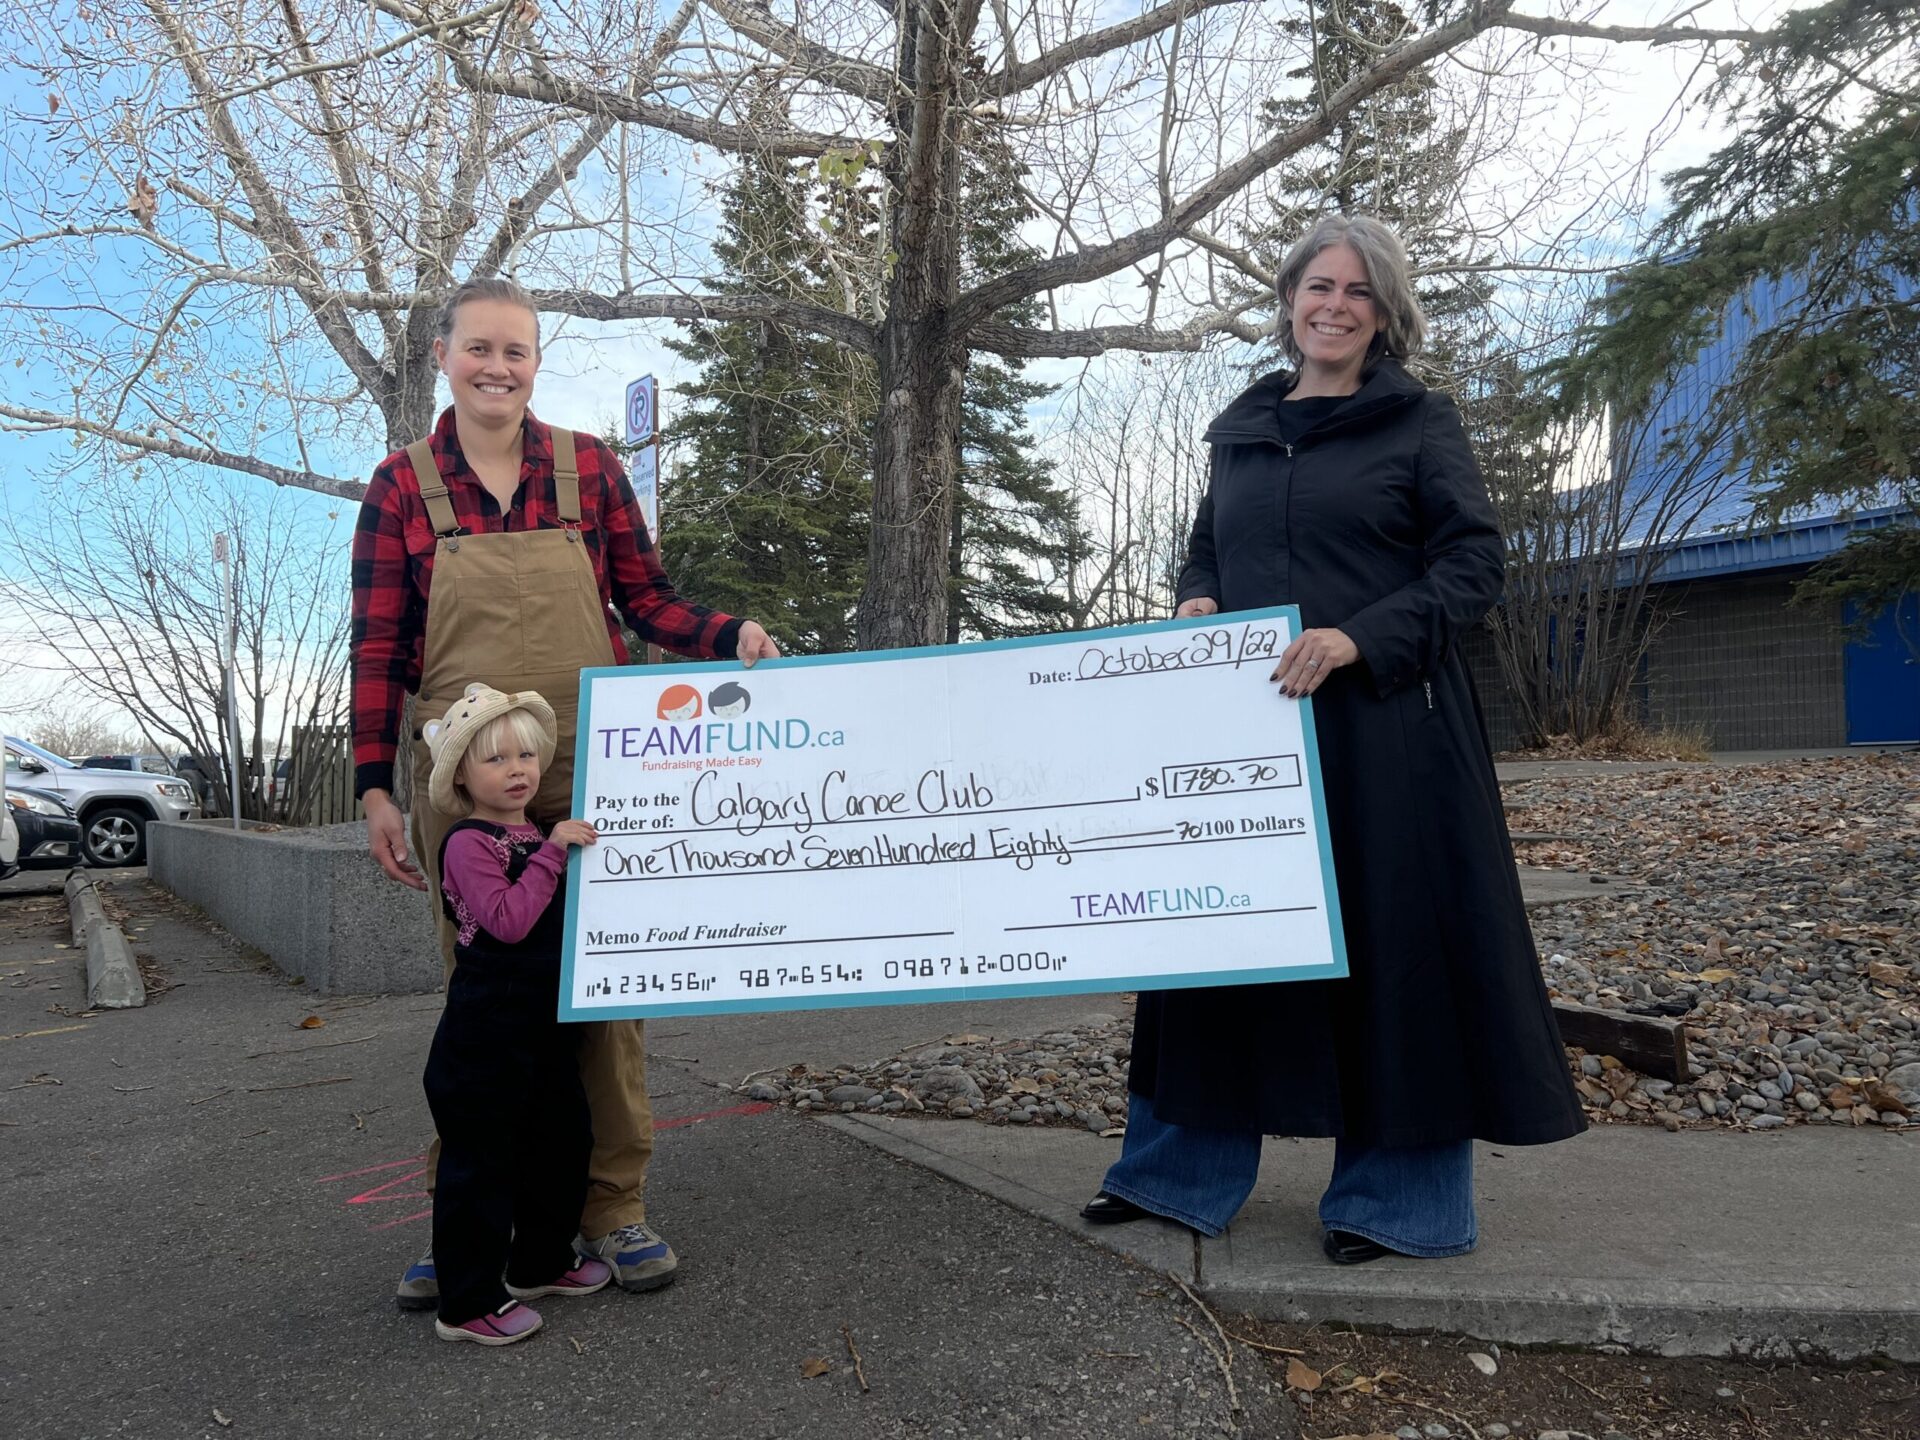 Members of the Calgary Canoe Club hold their cheque for almost $1800 in online fundraising to support their goal of attending the Canoe Kayak Championships!